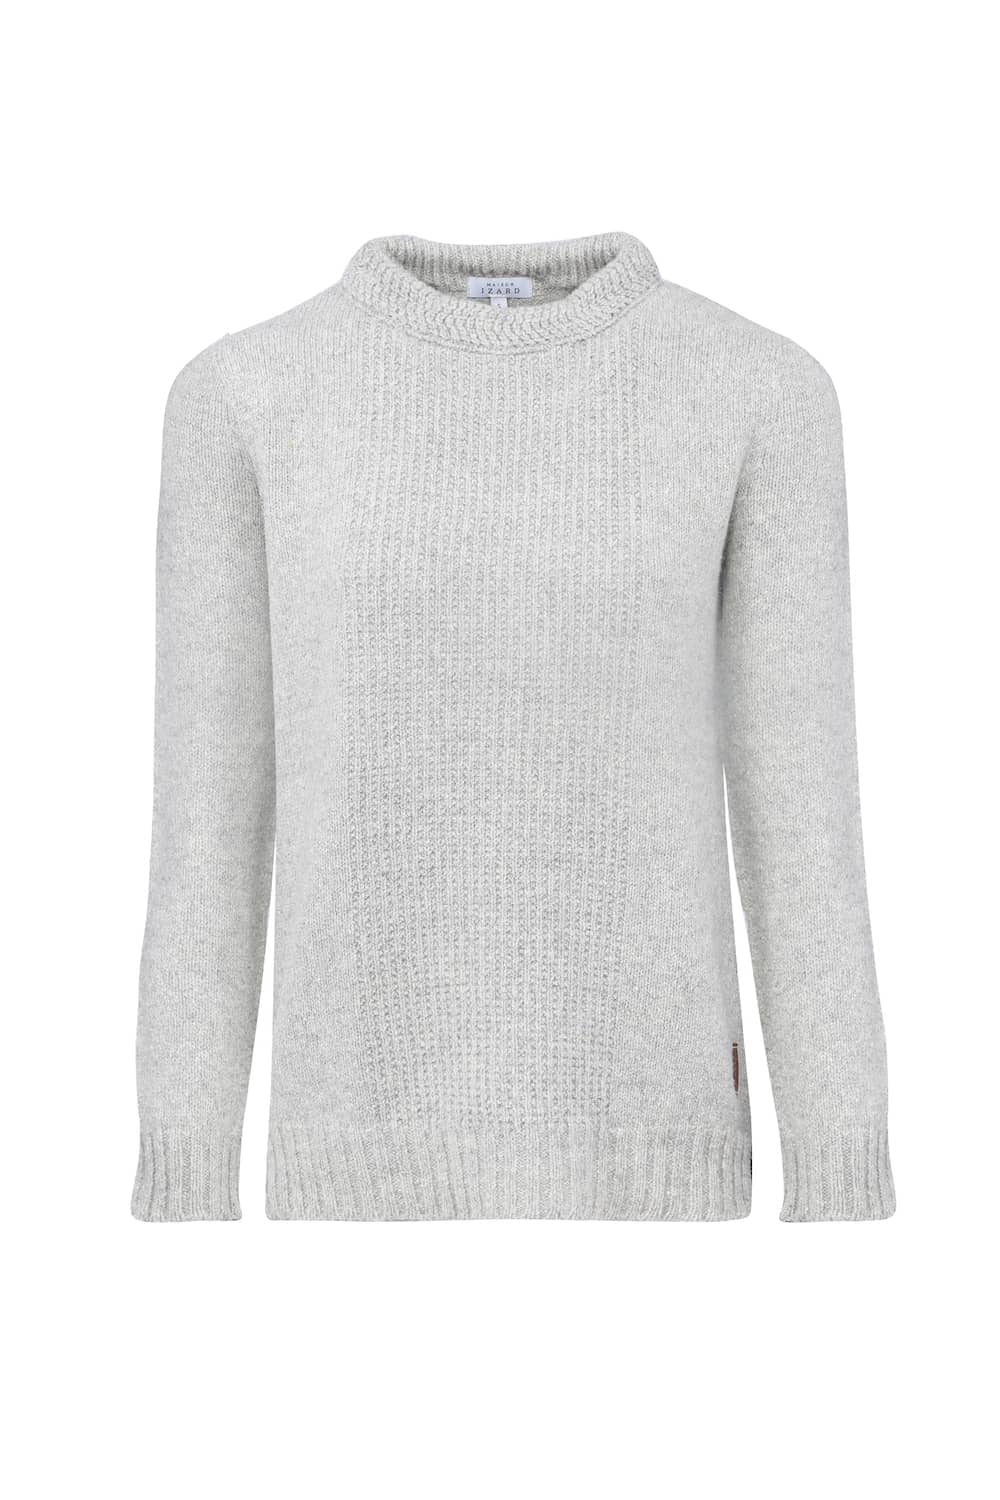 Pull Laine Gris - Femme - Made in France - Maison Izard